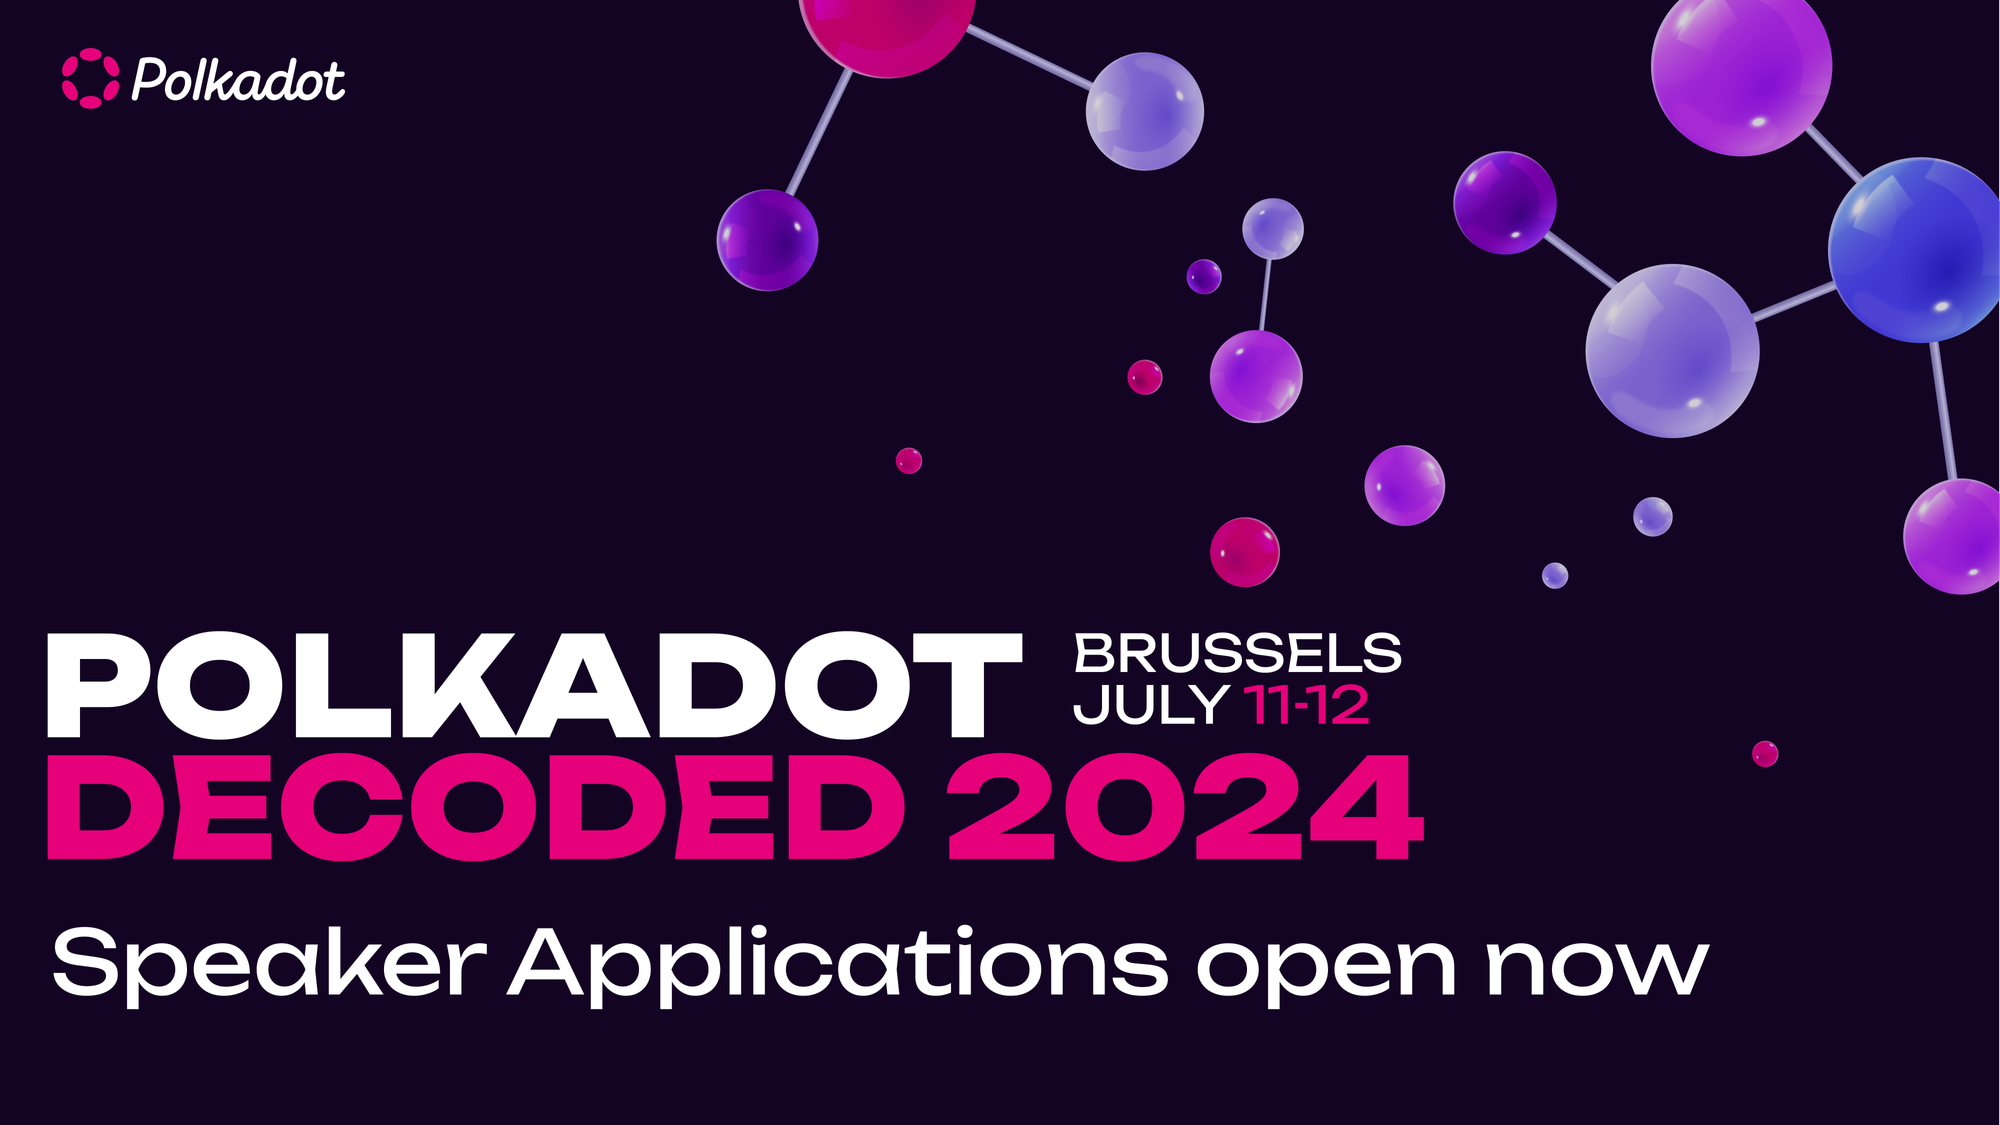 Polkadot Decoded 2024 Call for Speakers now open